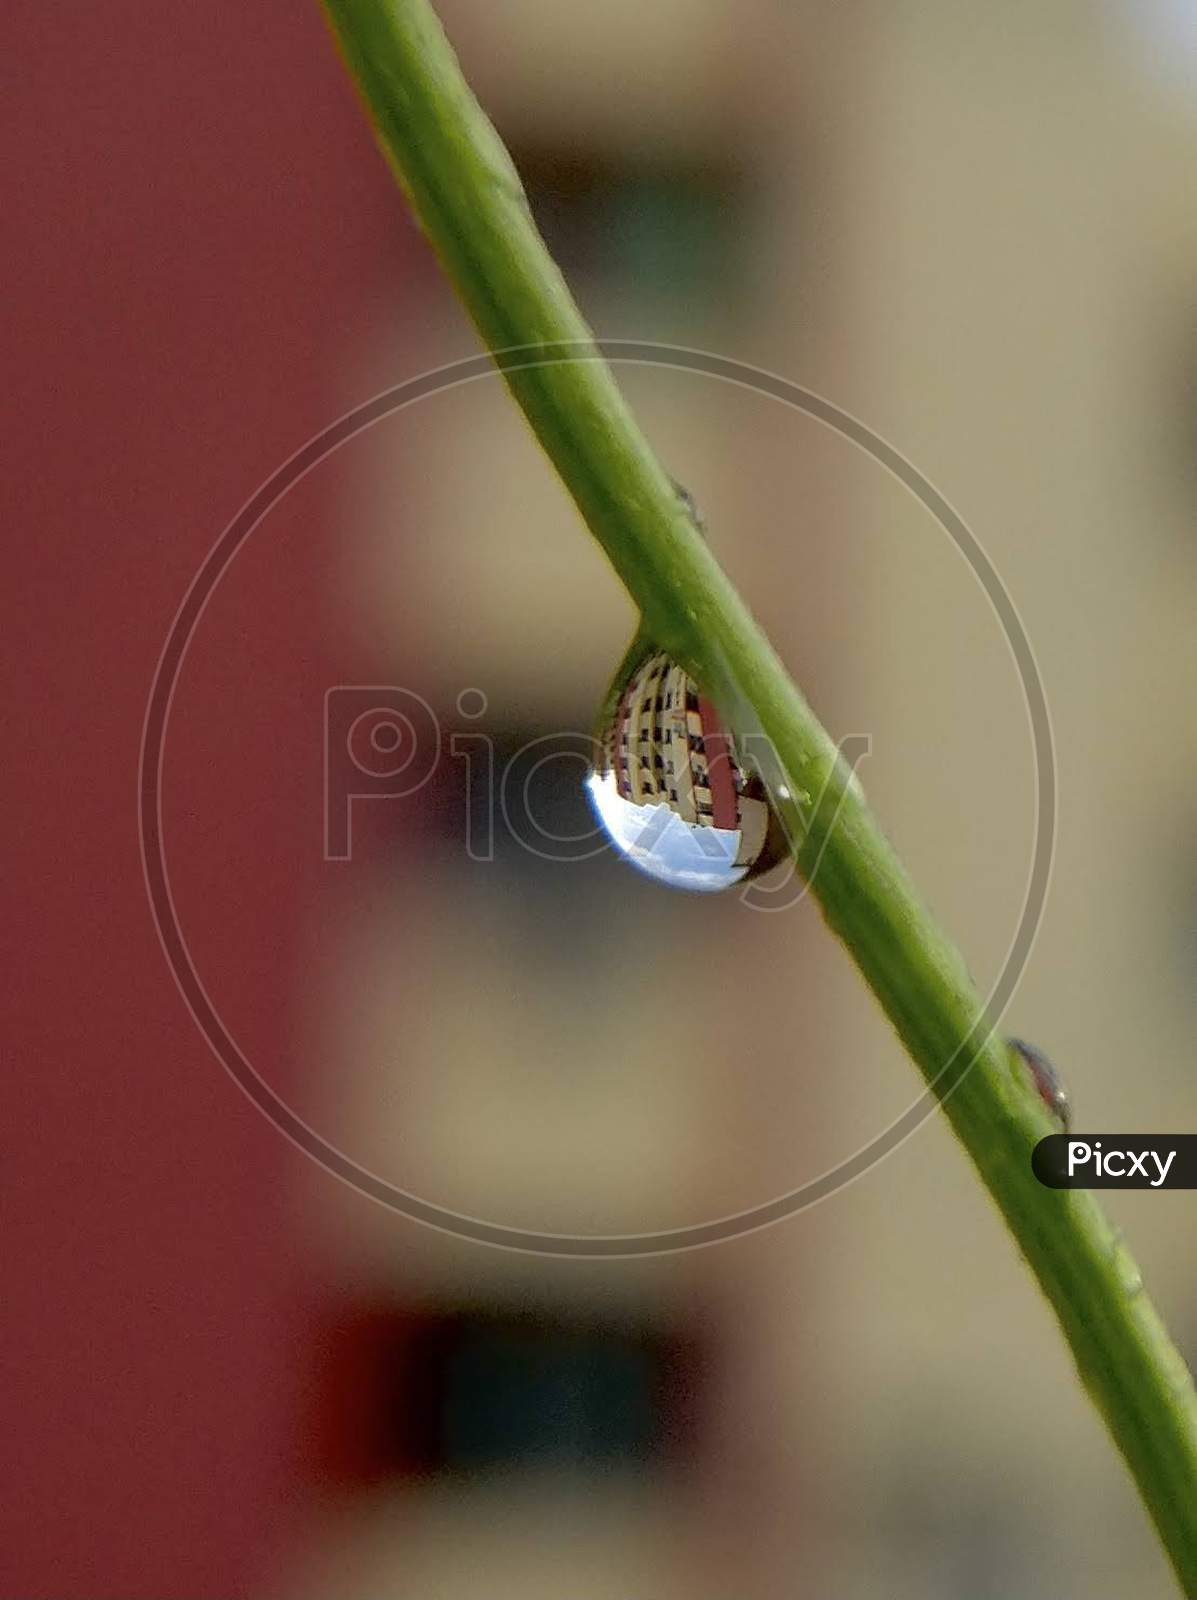 Building Within A Dew Drop